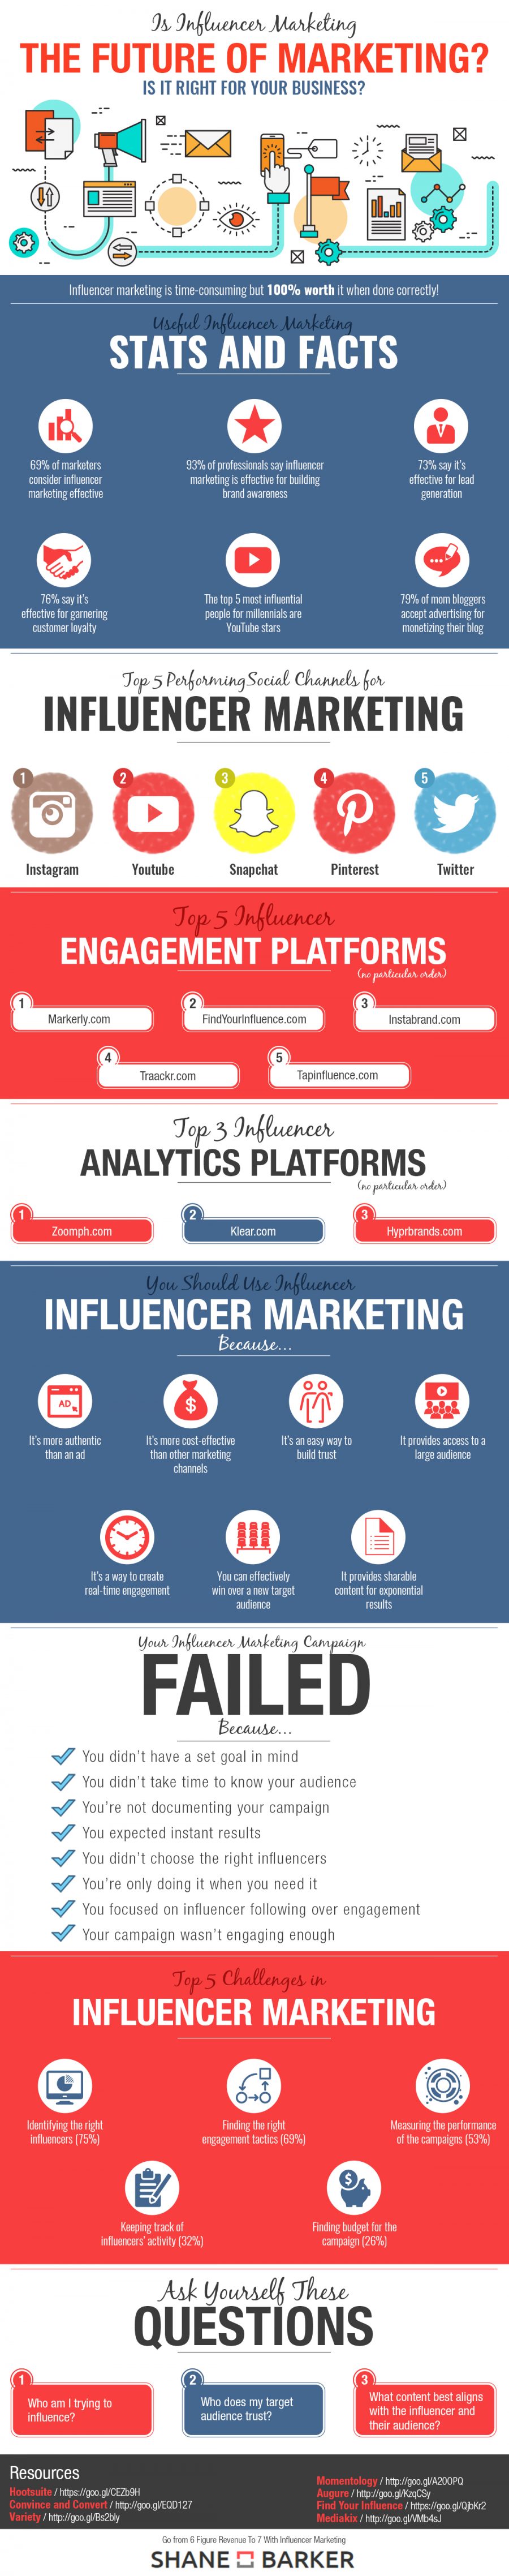 is-influencer-marketing-the-future-of-marketing